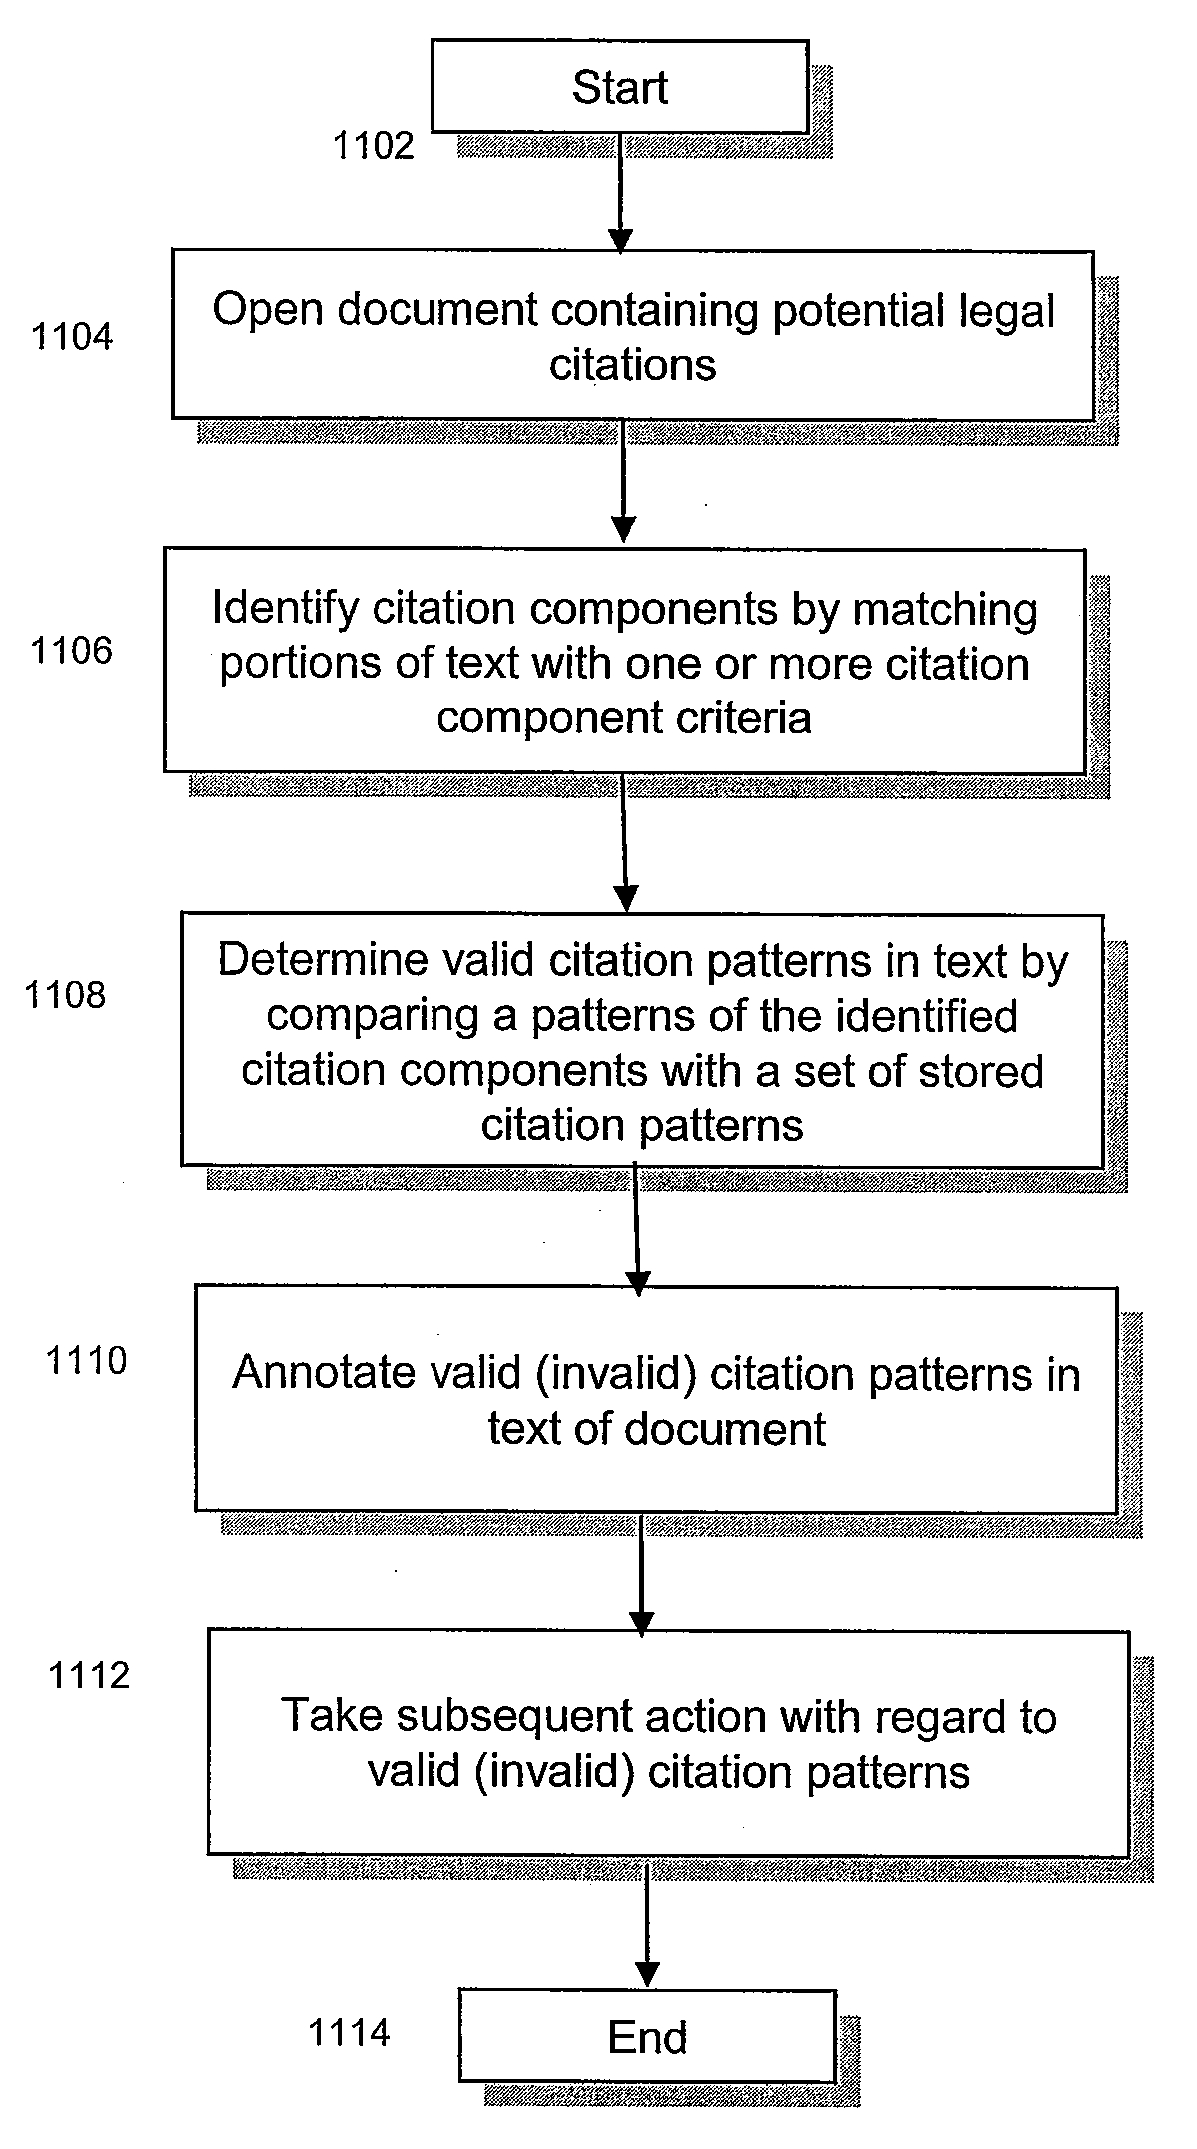 System and method for determining valid citation patterns in electronic documents